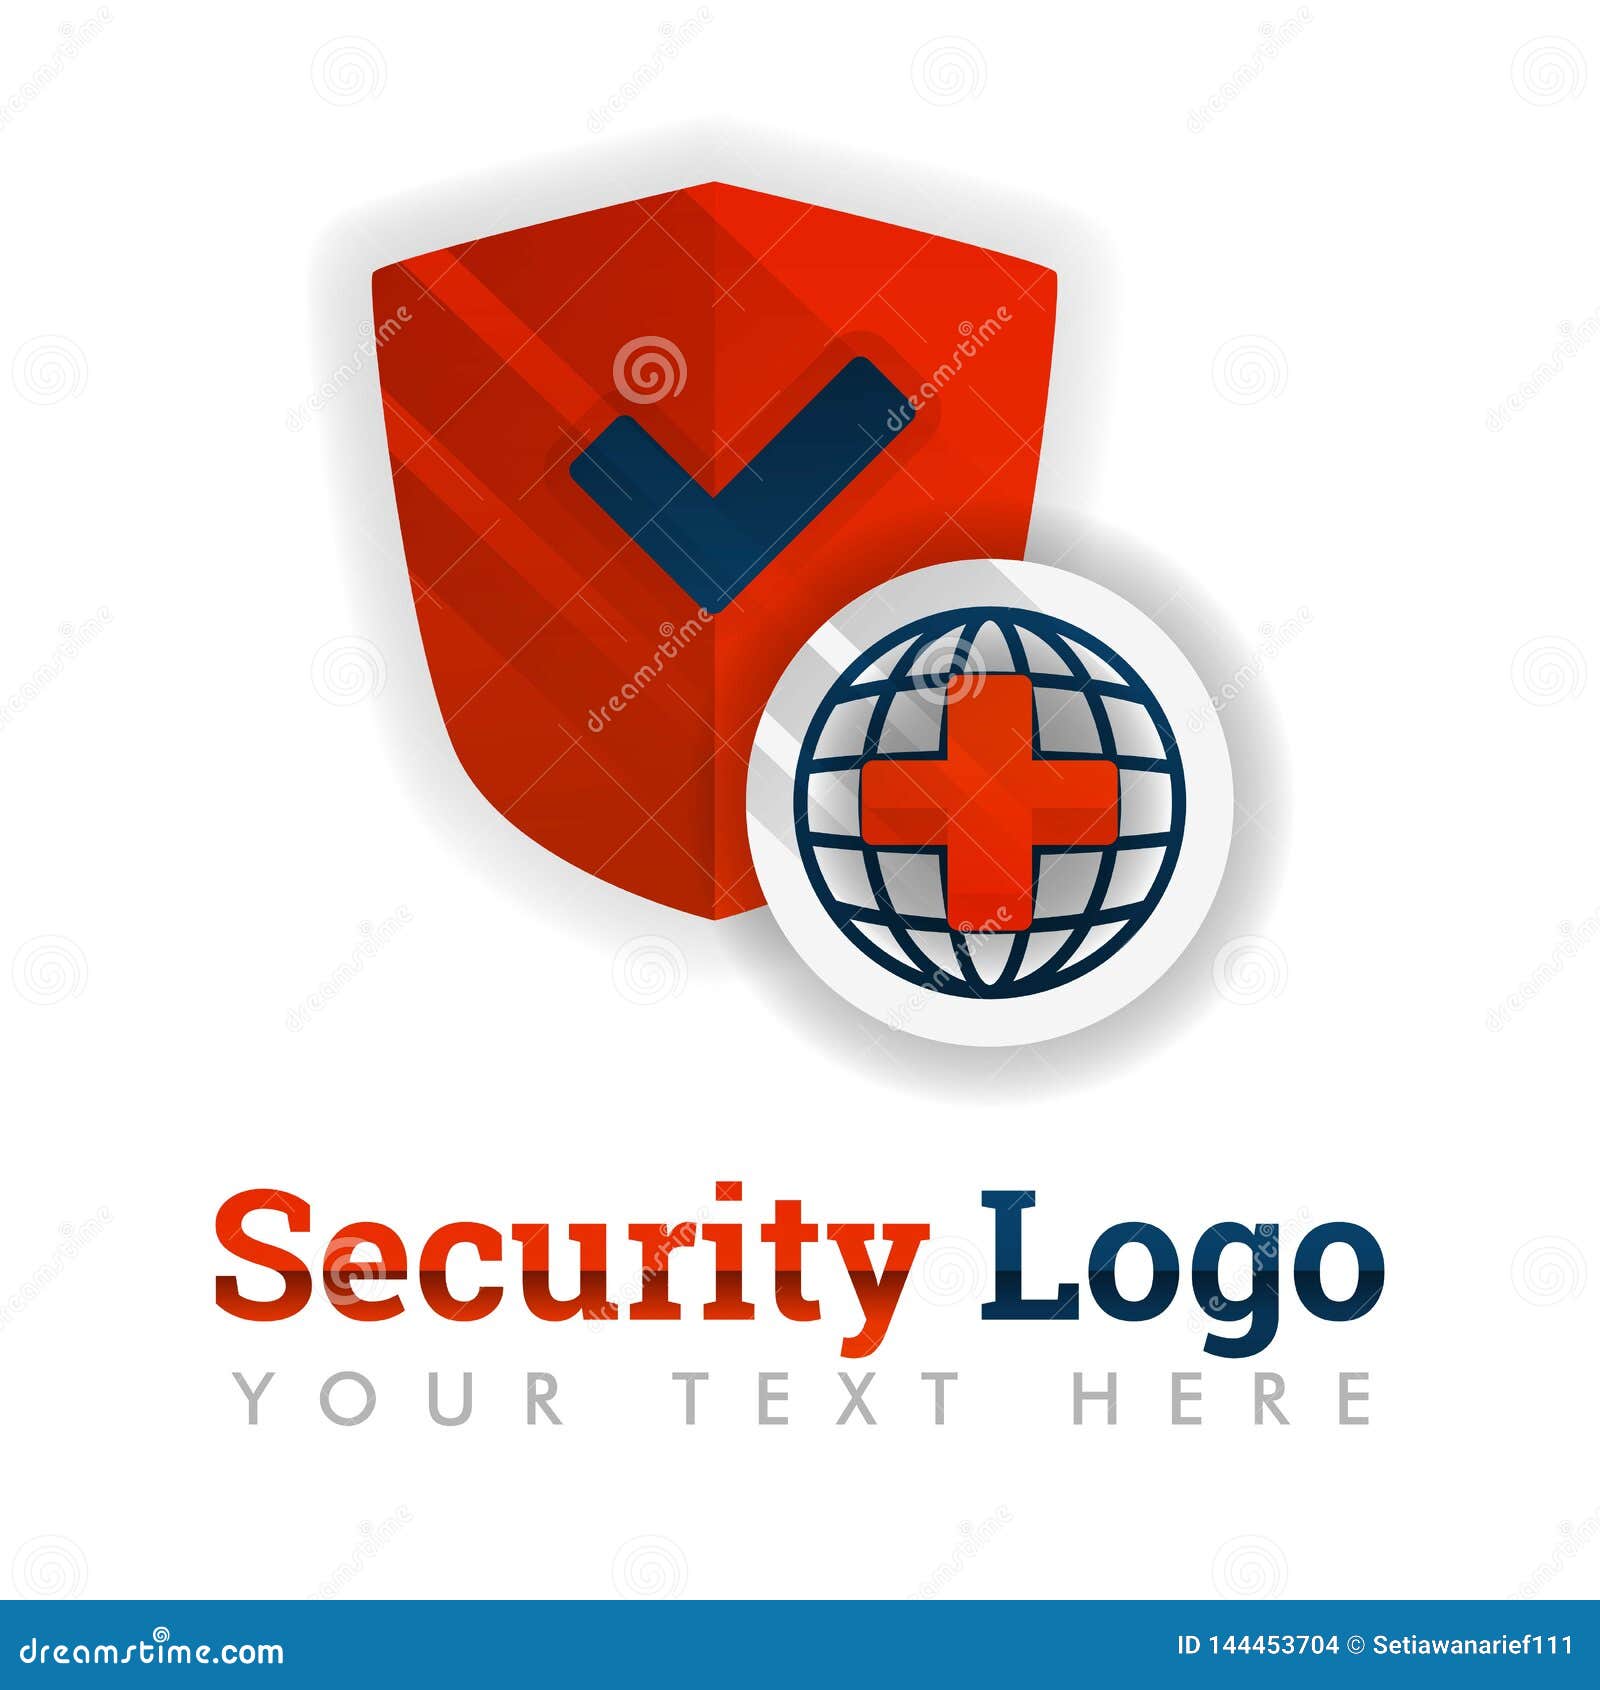 security logo template for service industries, herbal, medicine, hospital, insurance, health, software, antivirus, construction, s